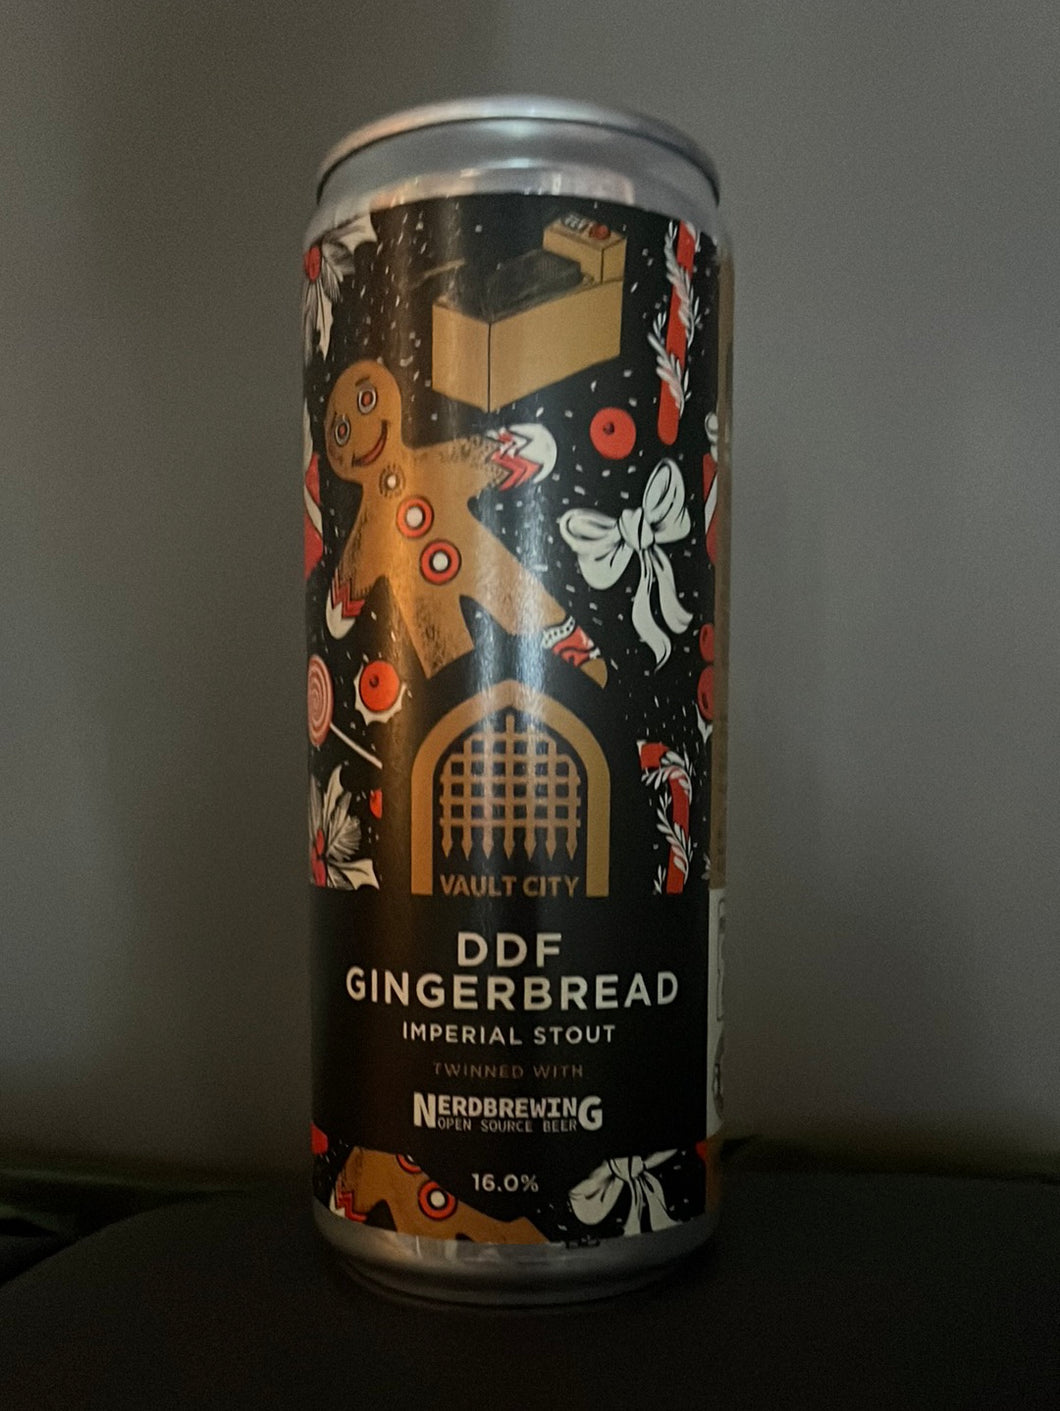 Vault City - DDF Gingerbread Imperial Stout